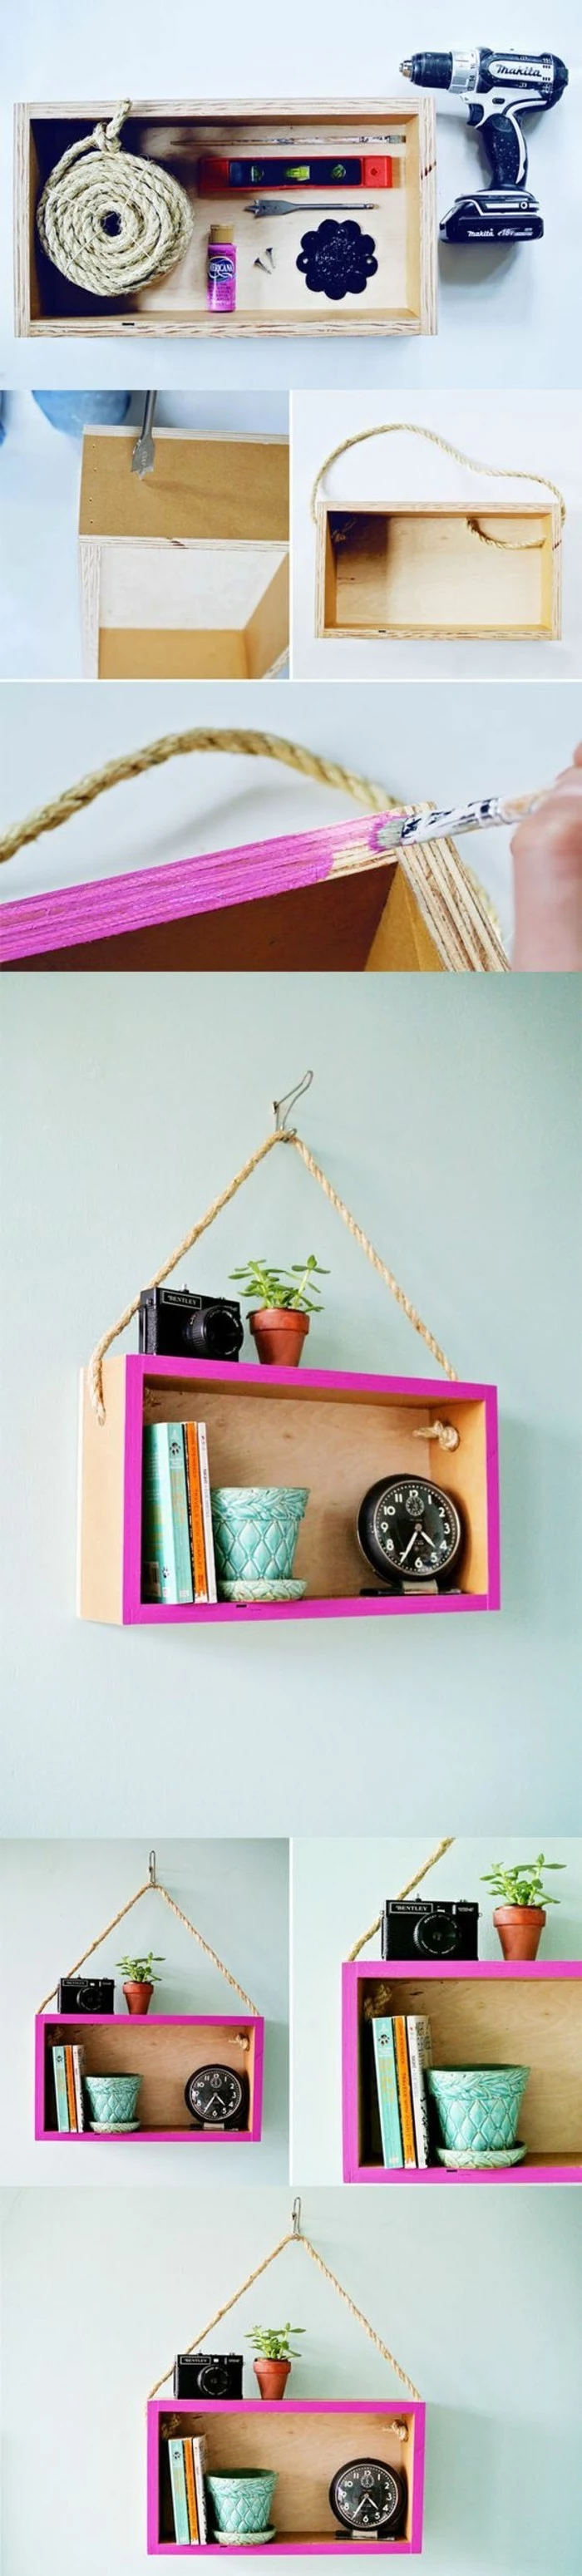 wooden crate, hanging on a white wall, unique wall decor, step by step, diy tutorial, painted pink frame